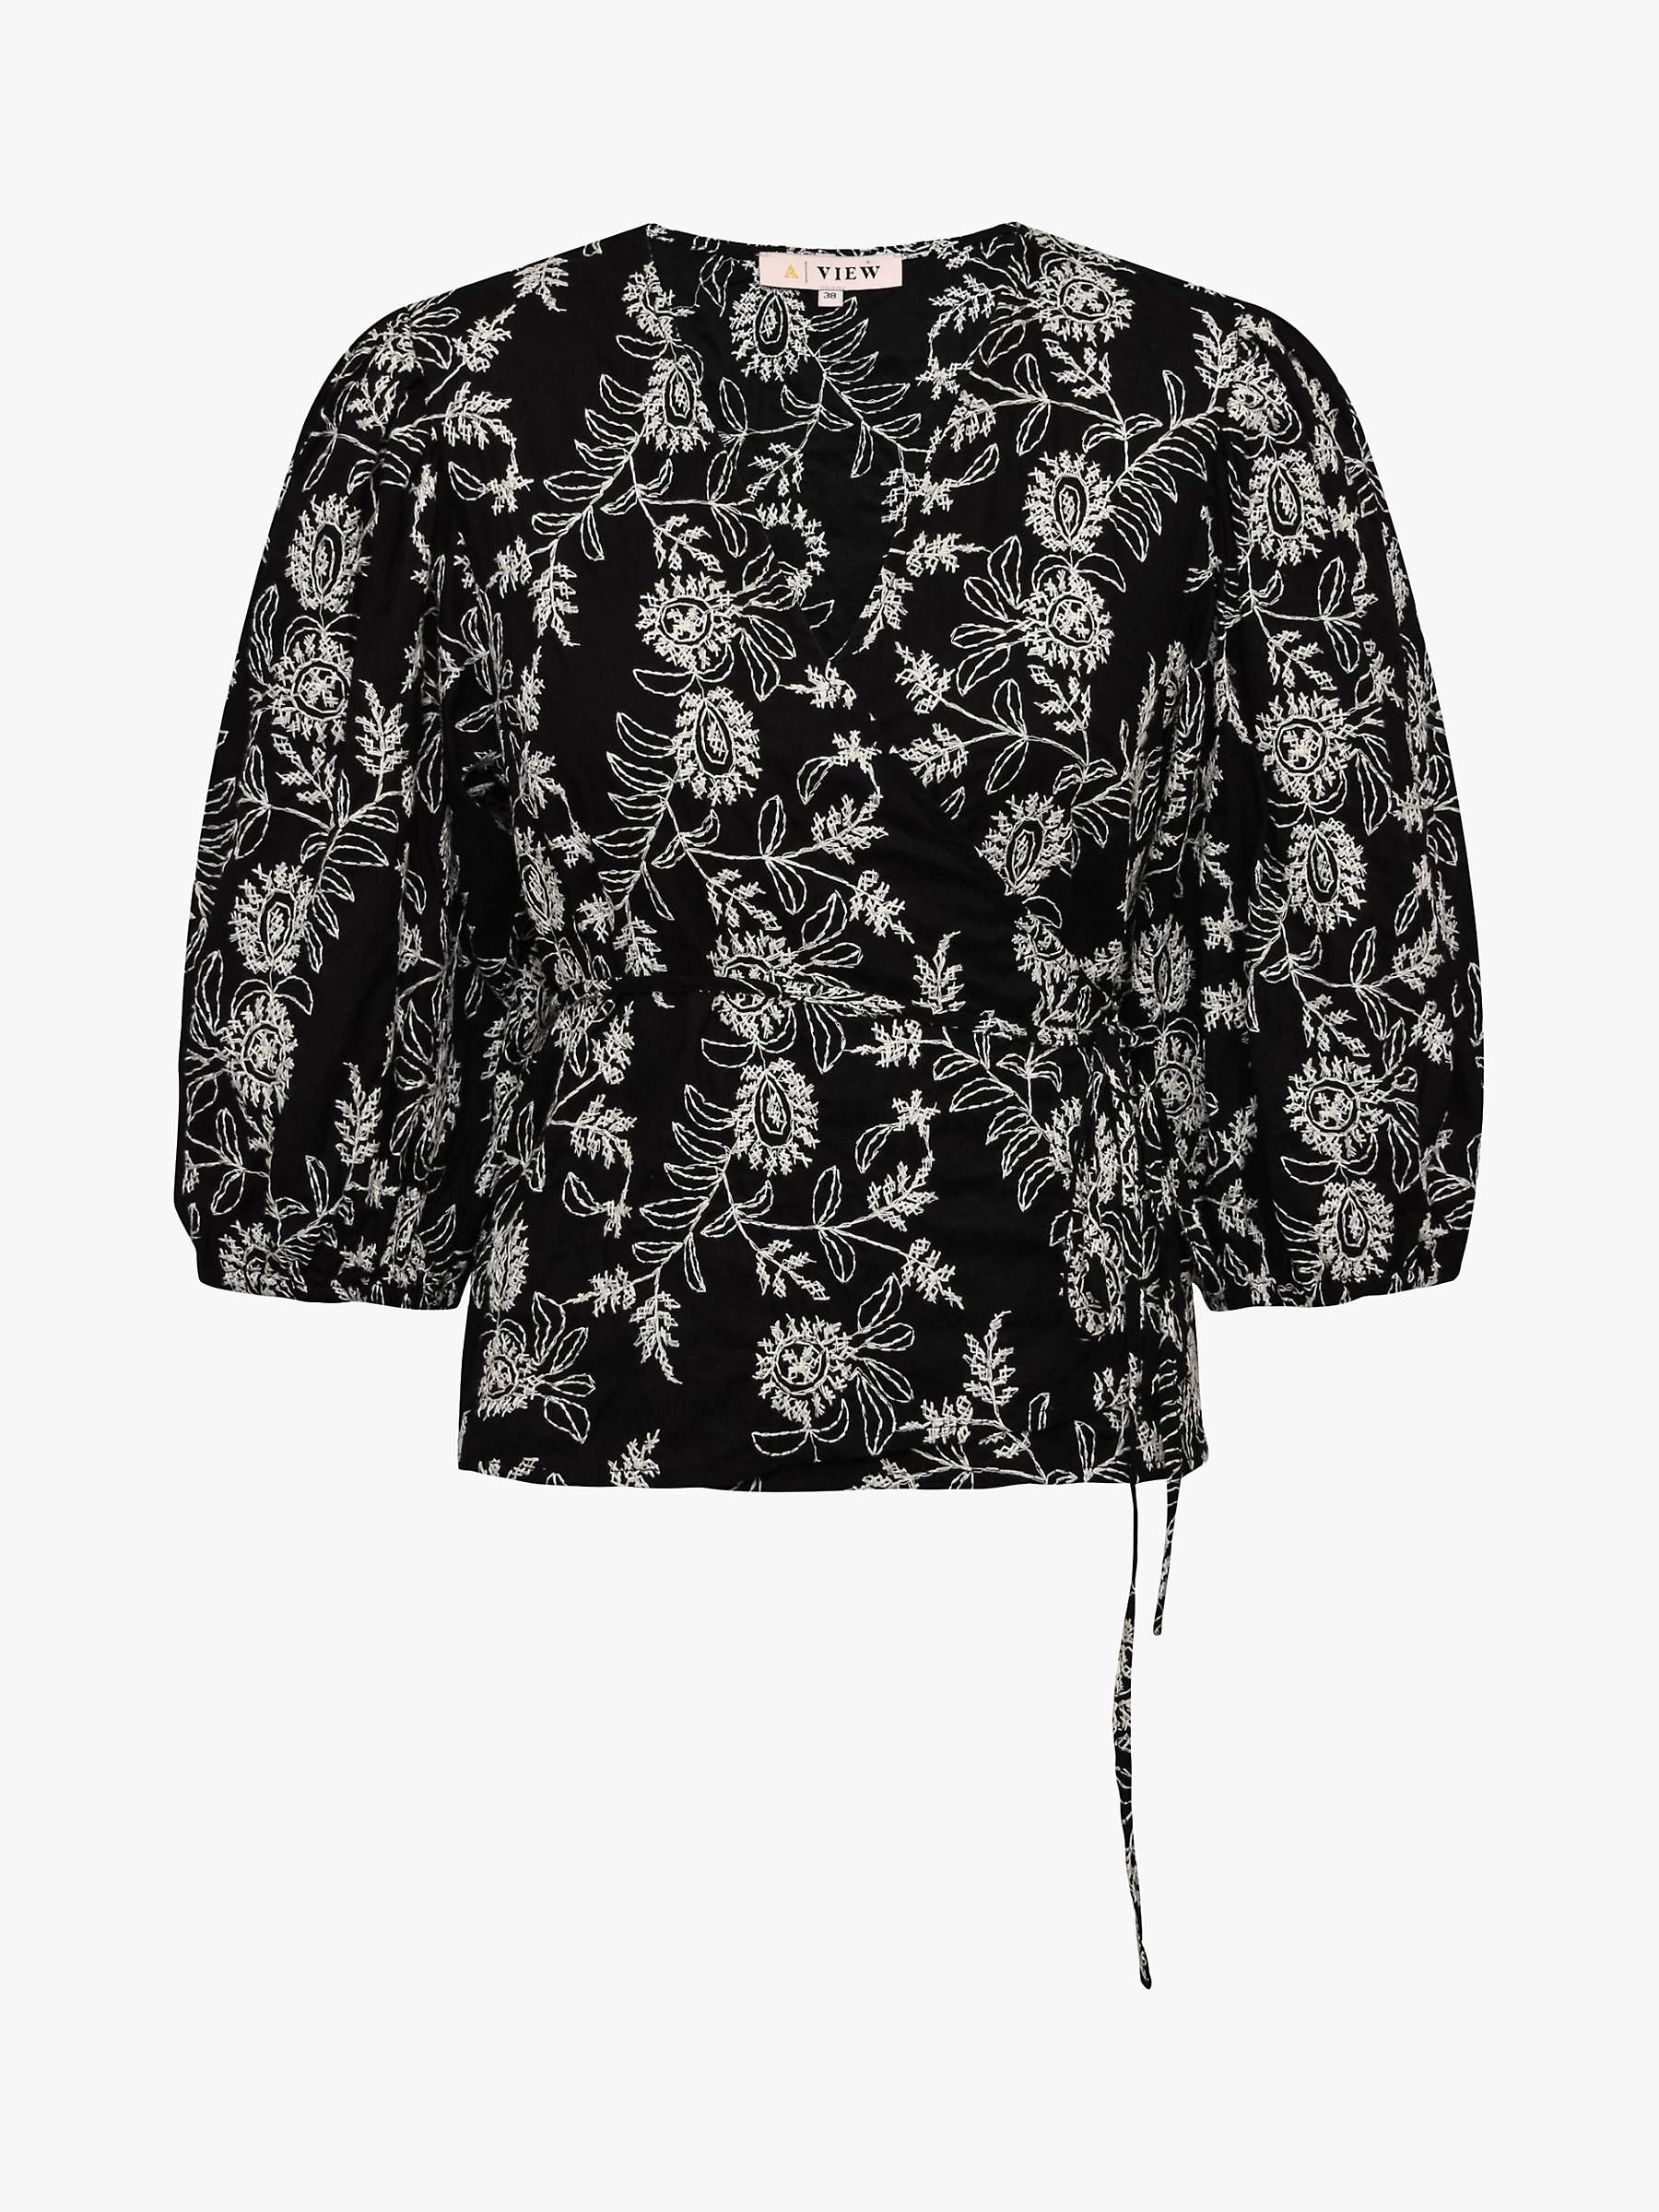 Buy A-VIEW Embroidered Cotton Blouse, Black/Off White Online at johnlewis.com